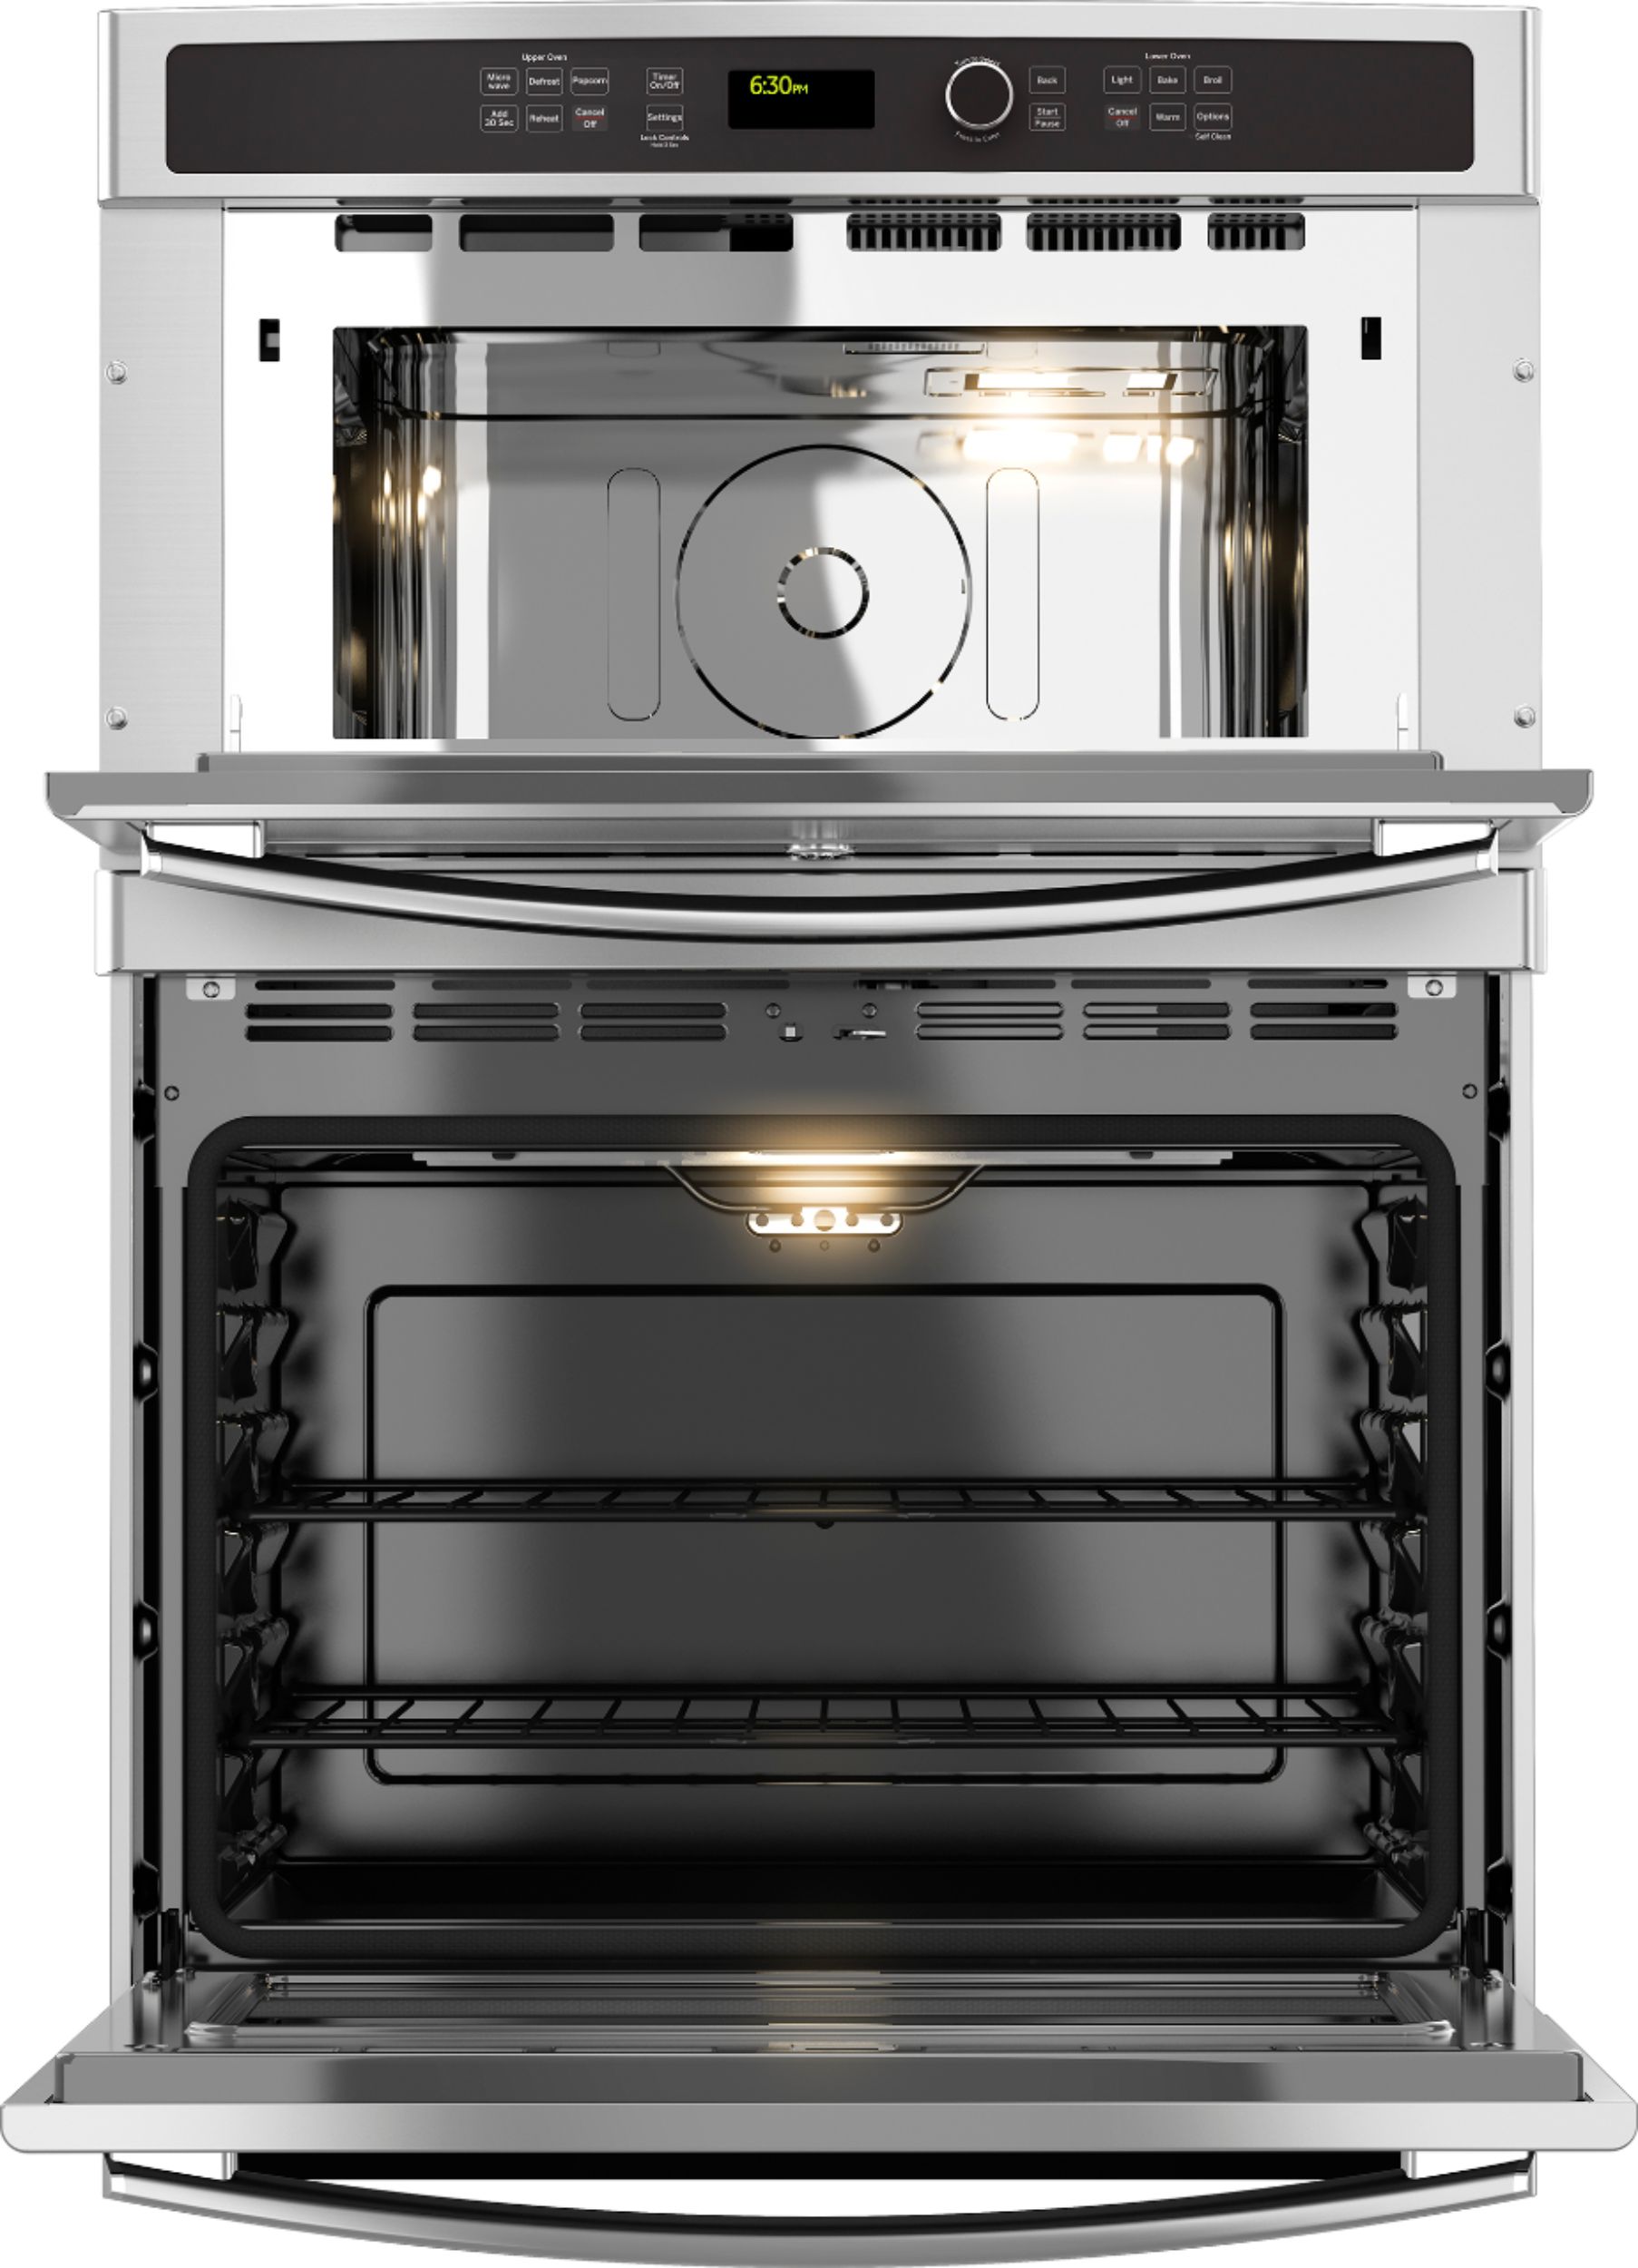 Angle View: Whirlpool - Smart 30" Double Electric Wall Oven with Built-In Microwave - Black